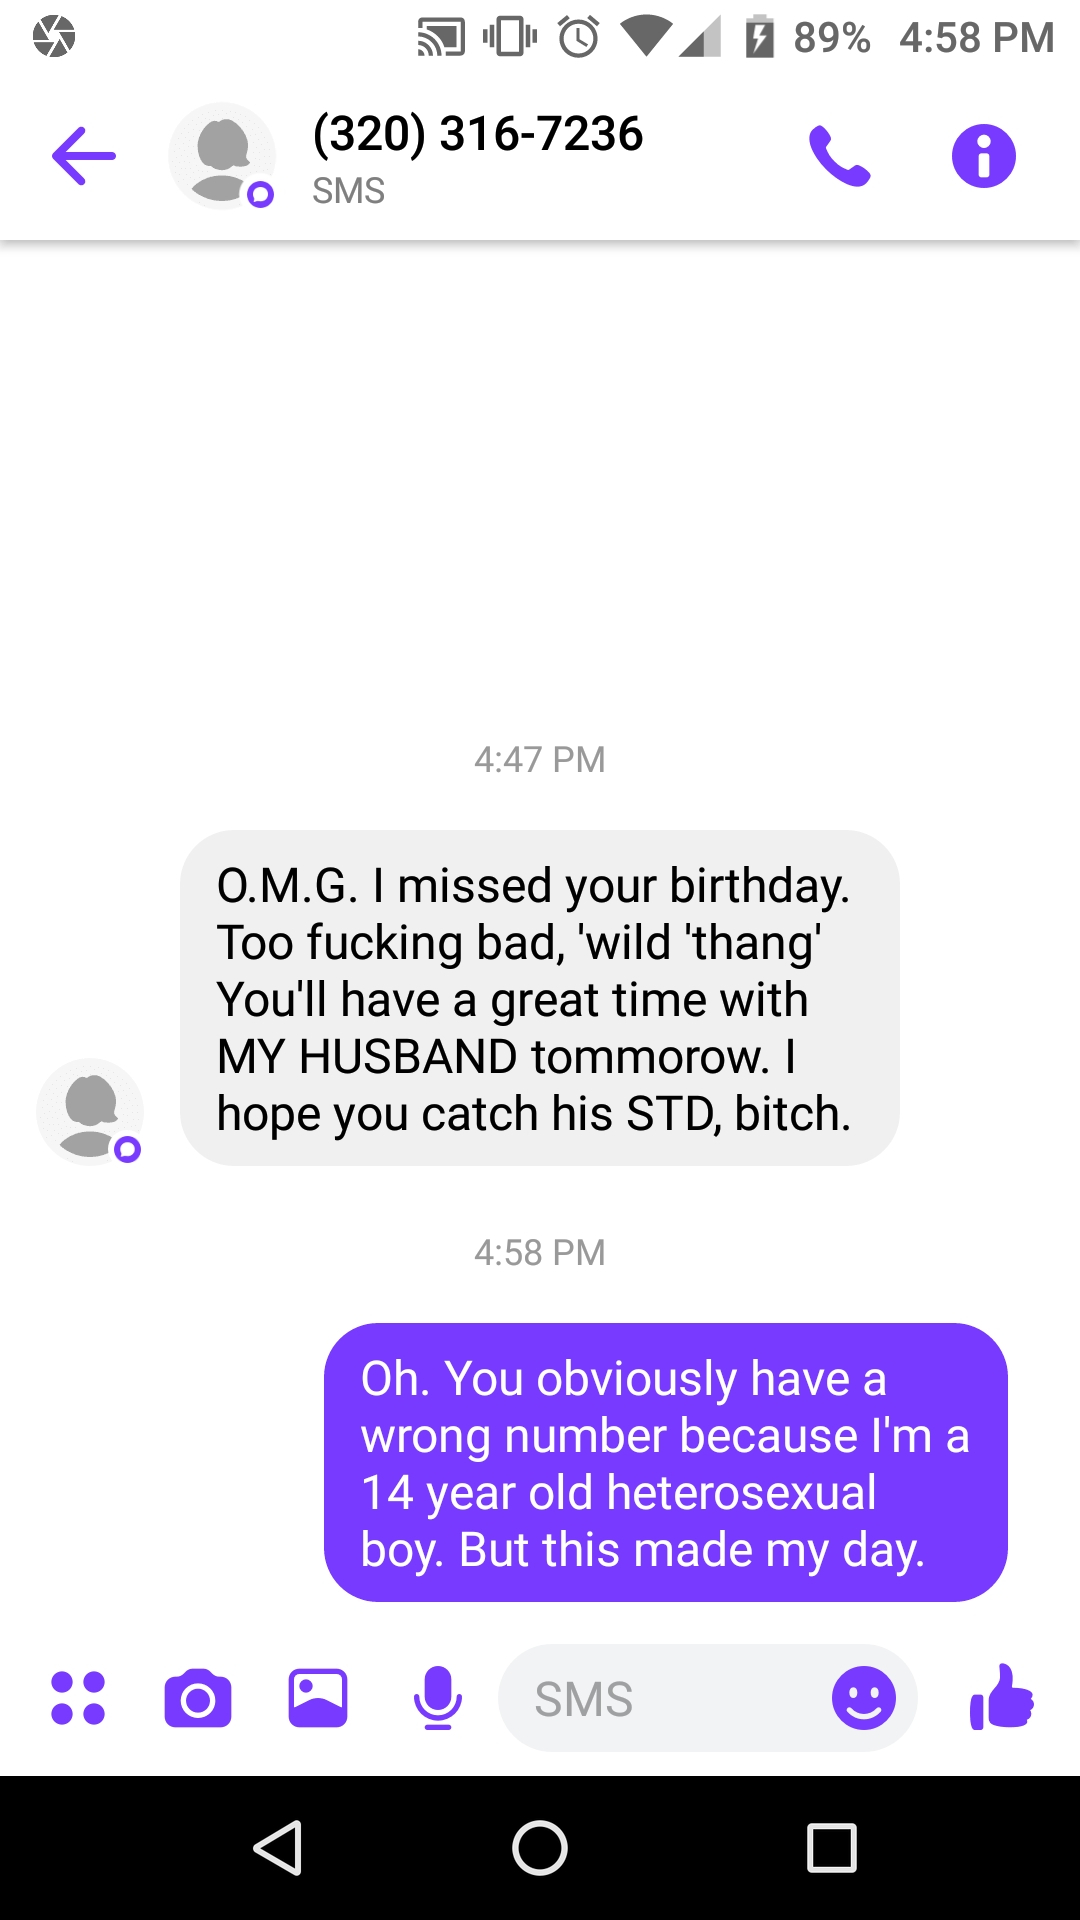 screenshot - E 50 320 3167236 89% 6 s co Sms O.M.G. I missed your birthday. Too fucking bad, 'wild 'thang' You'll have a great time with My Husband tommorow. I hope you catch his Std, bitch. Oh. You obviously have a wrong number because I'm a 14 year old 